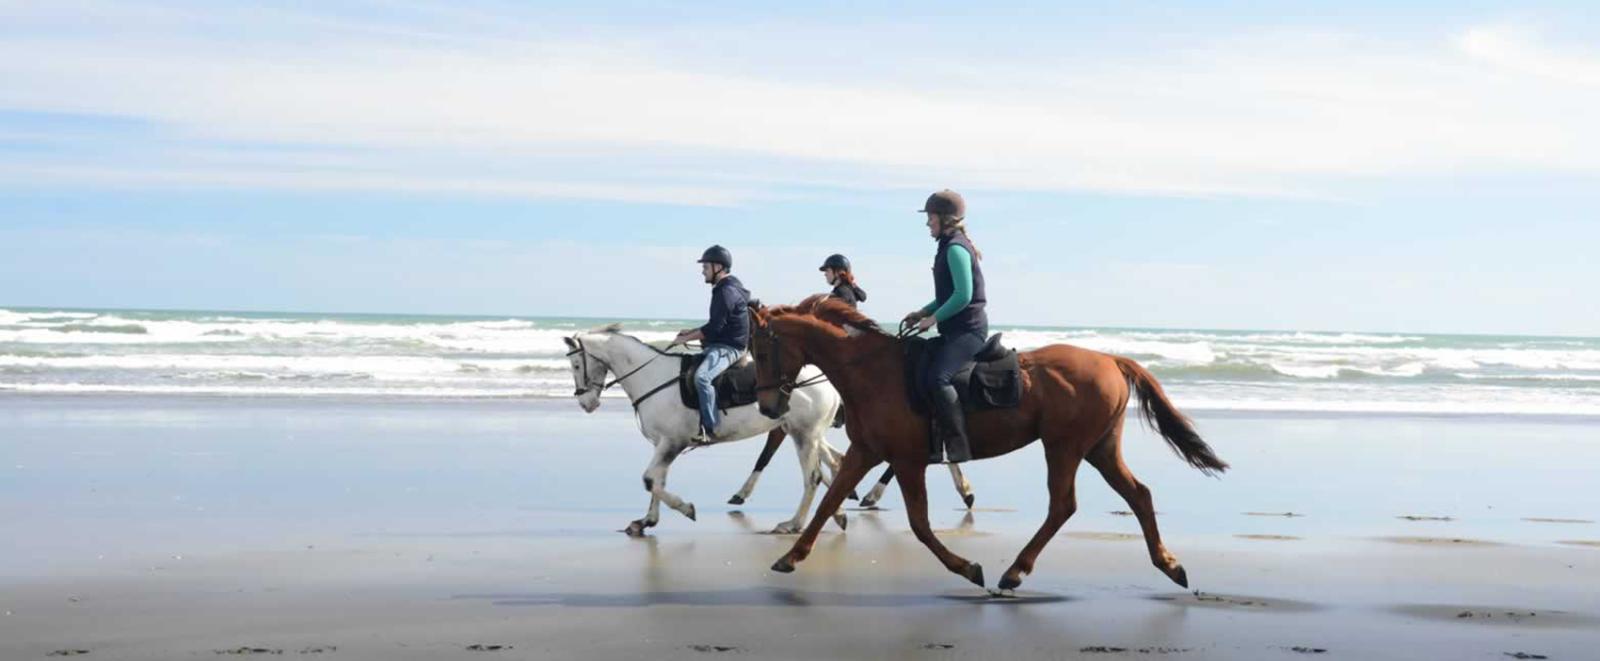 3 mighty horses thunder along the beach in North Auckland.